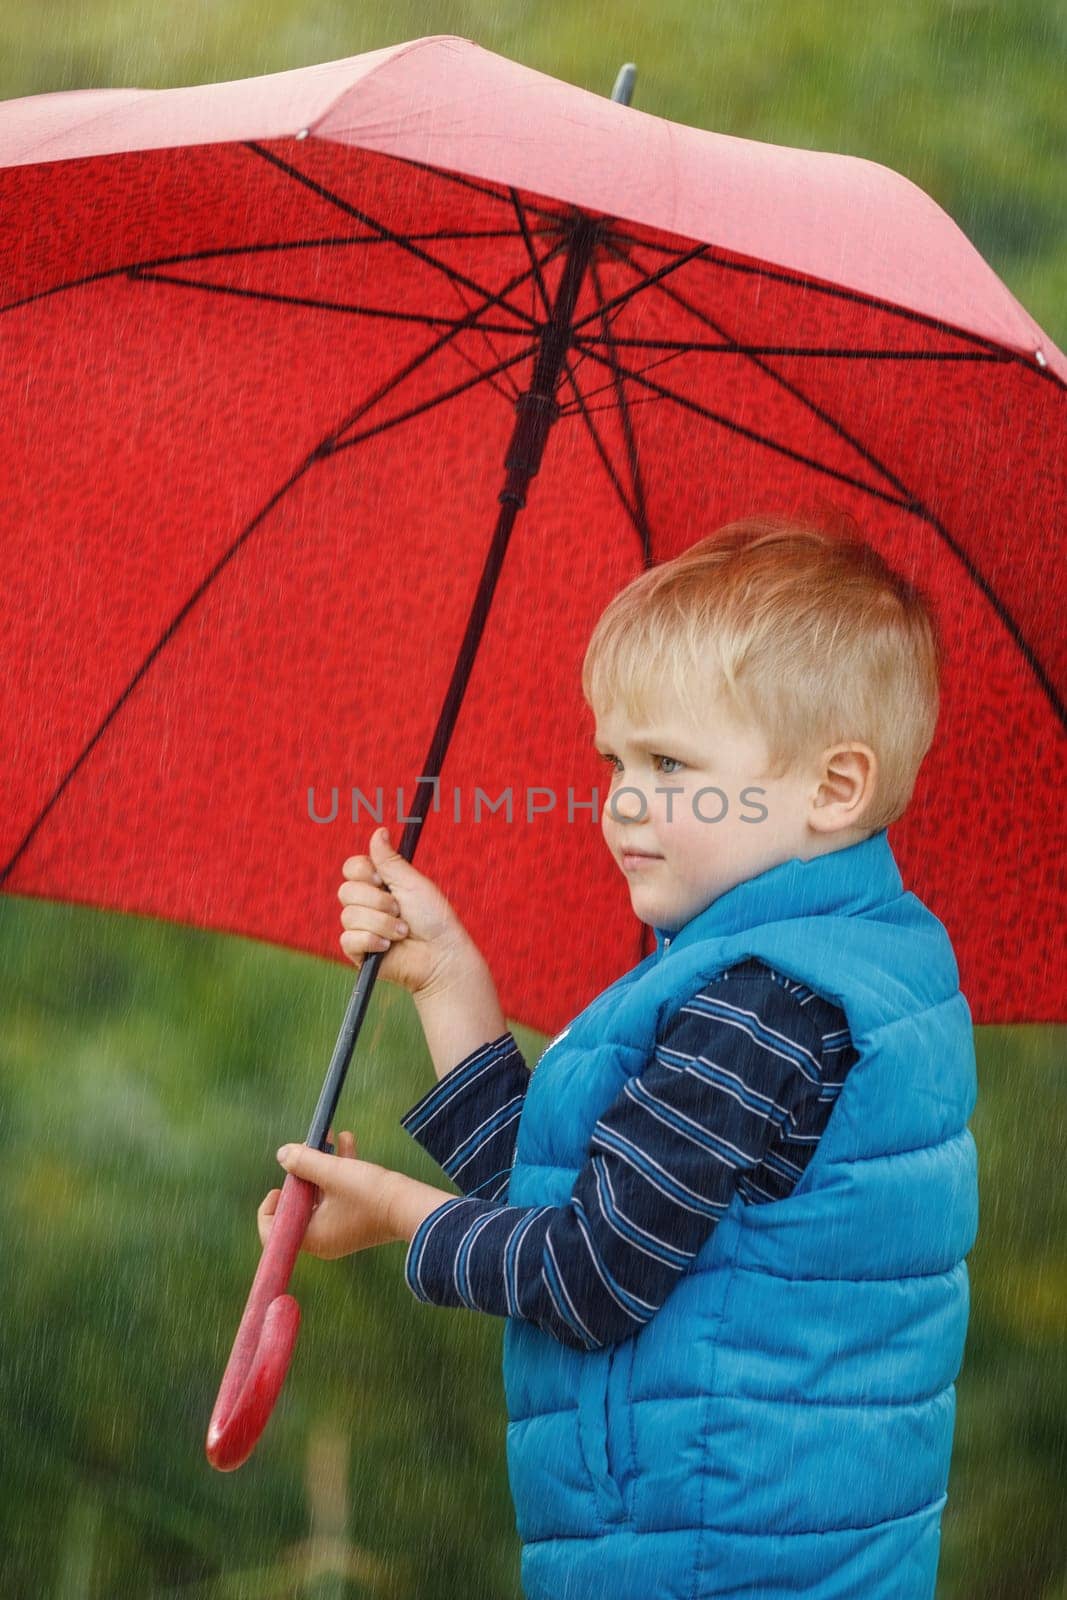 Adorable child holding an red umbrella during a rain storm. Vertical photo.